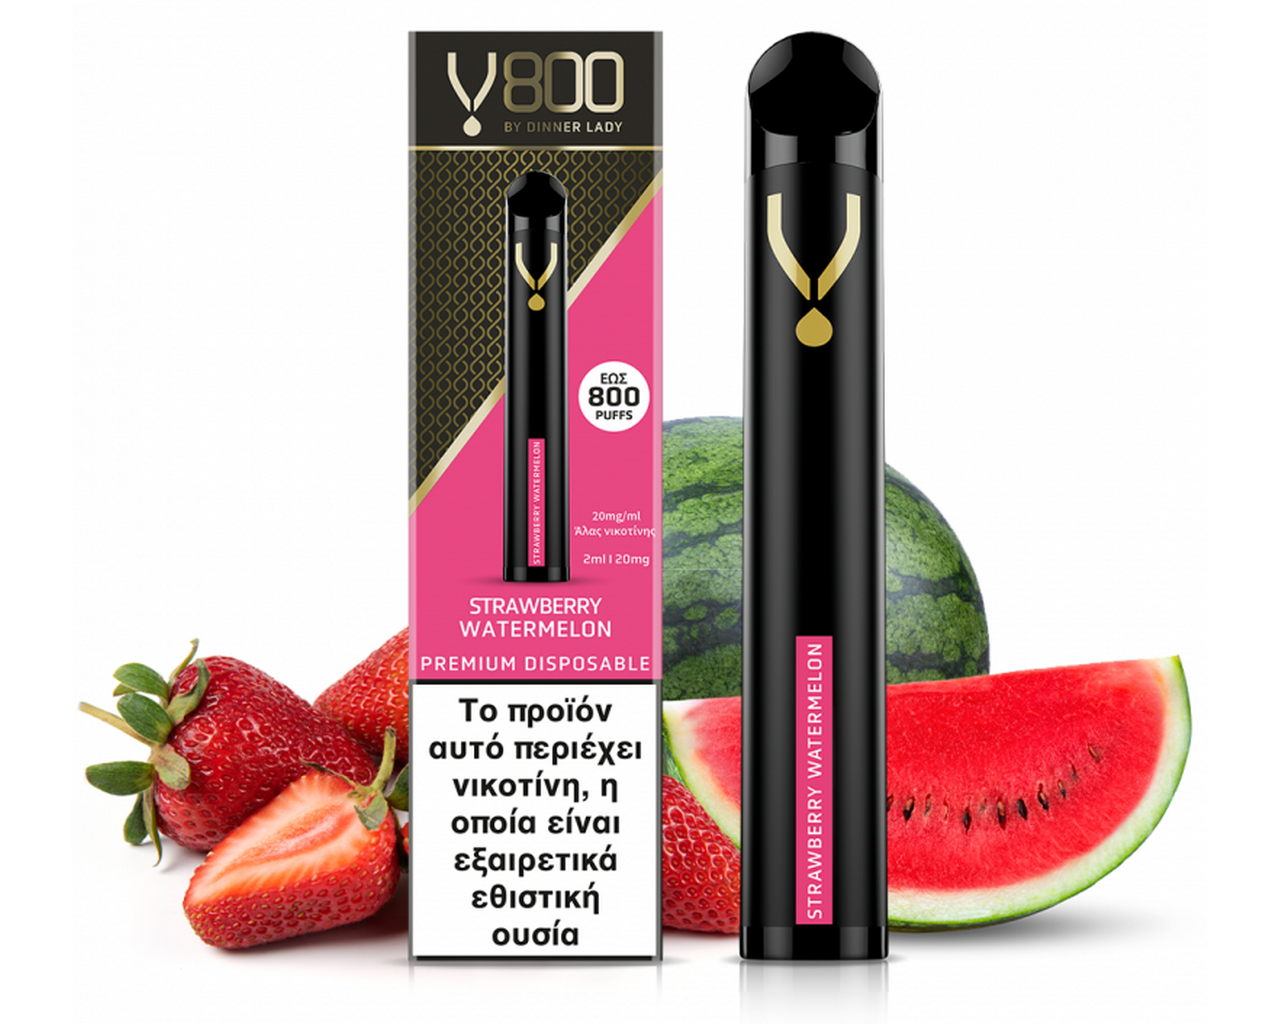 Dinner Lady V800 Disposable Strawberry Watermelon 2ml | 20mg